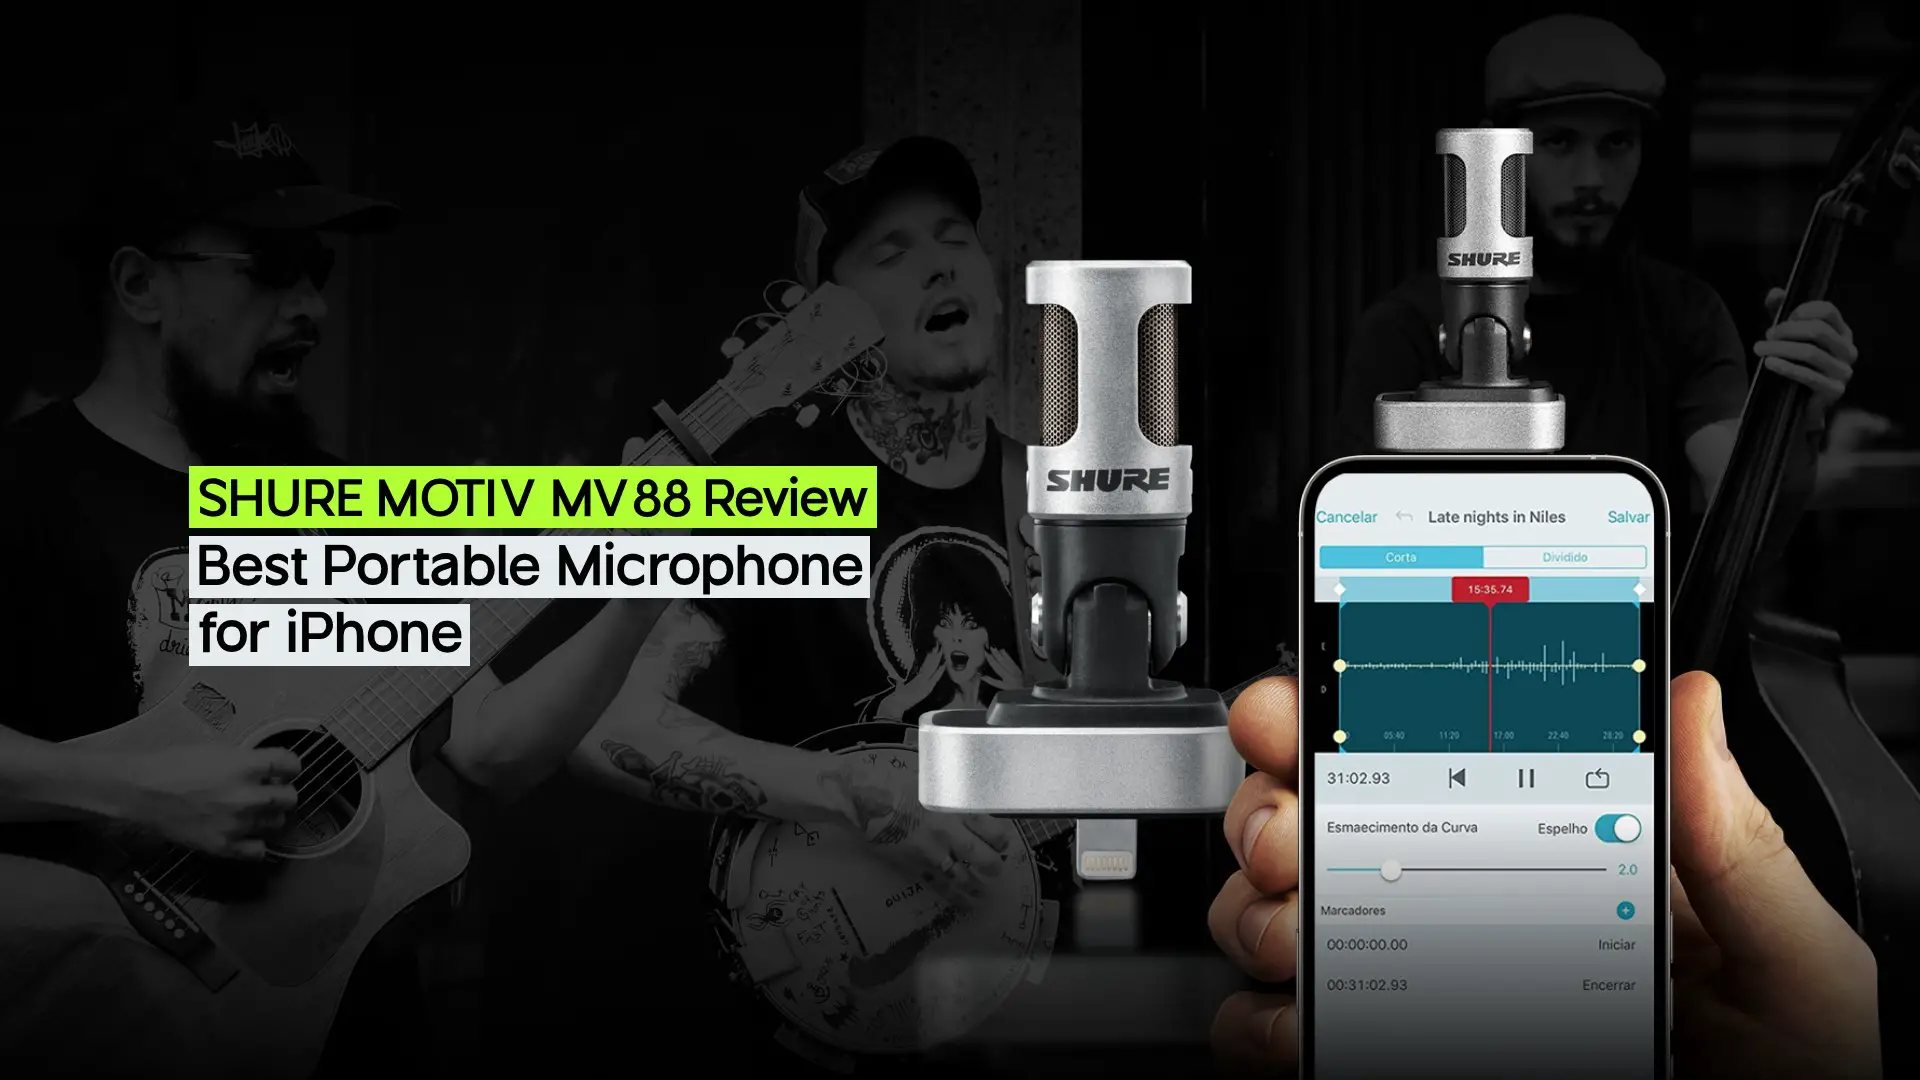 SHURE MOTIV MV88 Review — Best Portable Microphone for iPhone